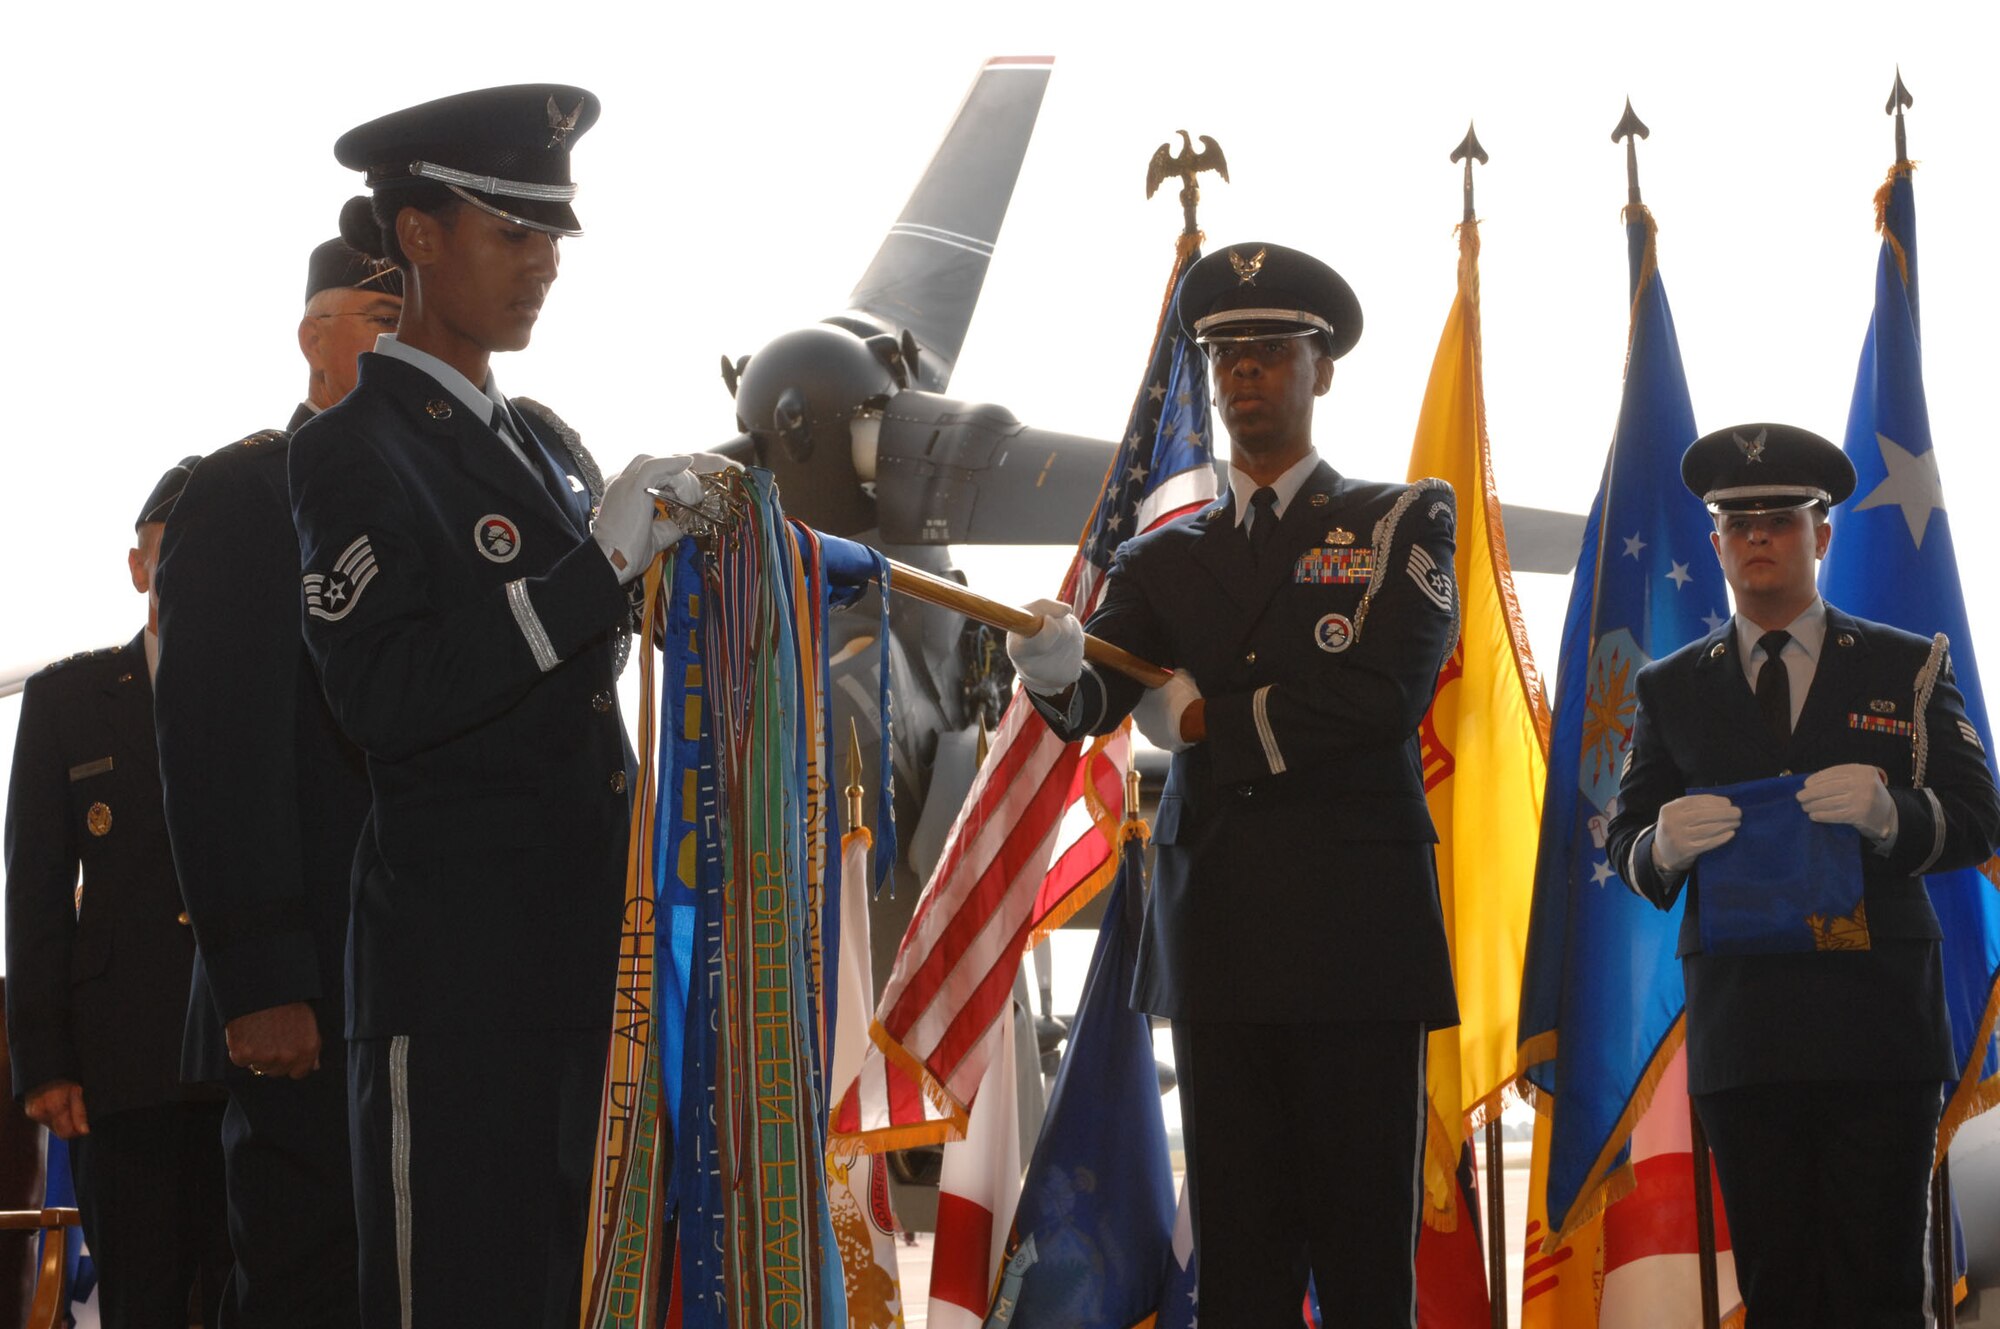 CANNON AIR FORCE BASE, N.M. -- Staff Sgt. Torrie McCutcheon, of the Cannon Honor Guard, removes the 27th Fighter Wing flag from the guidon held by Tech. Sgt. Rodney Barner, also of the Honor Guard. The flag was replaced by the 27th Special Operations Wing flag during a change-of-command ceremony at Cannon Air Force Base Oct. 1. (U.S. Air Force photo by Airman 1st Class Evelyn Chavez)